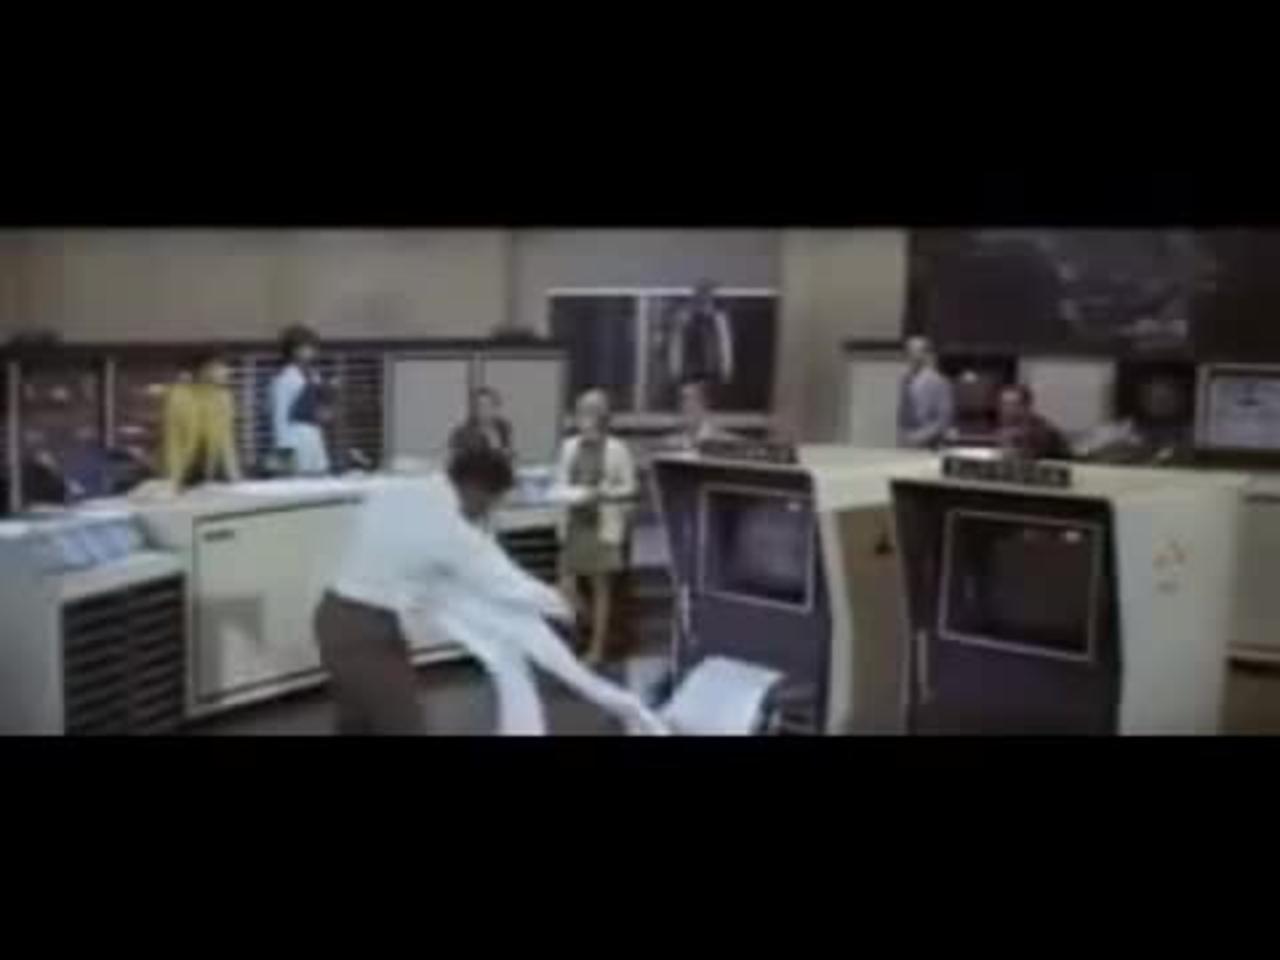 Colossus: The Forbin Project /// 1970 American science fiction film trailer